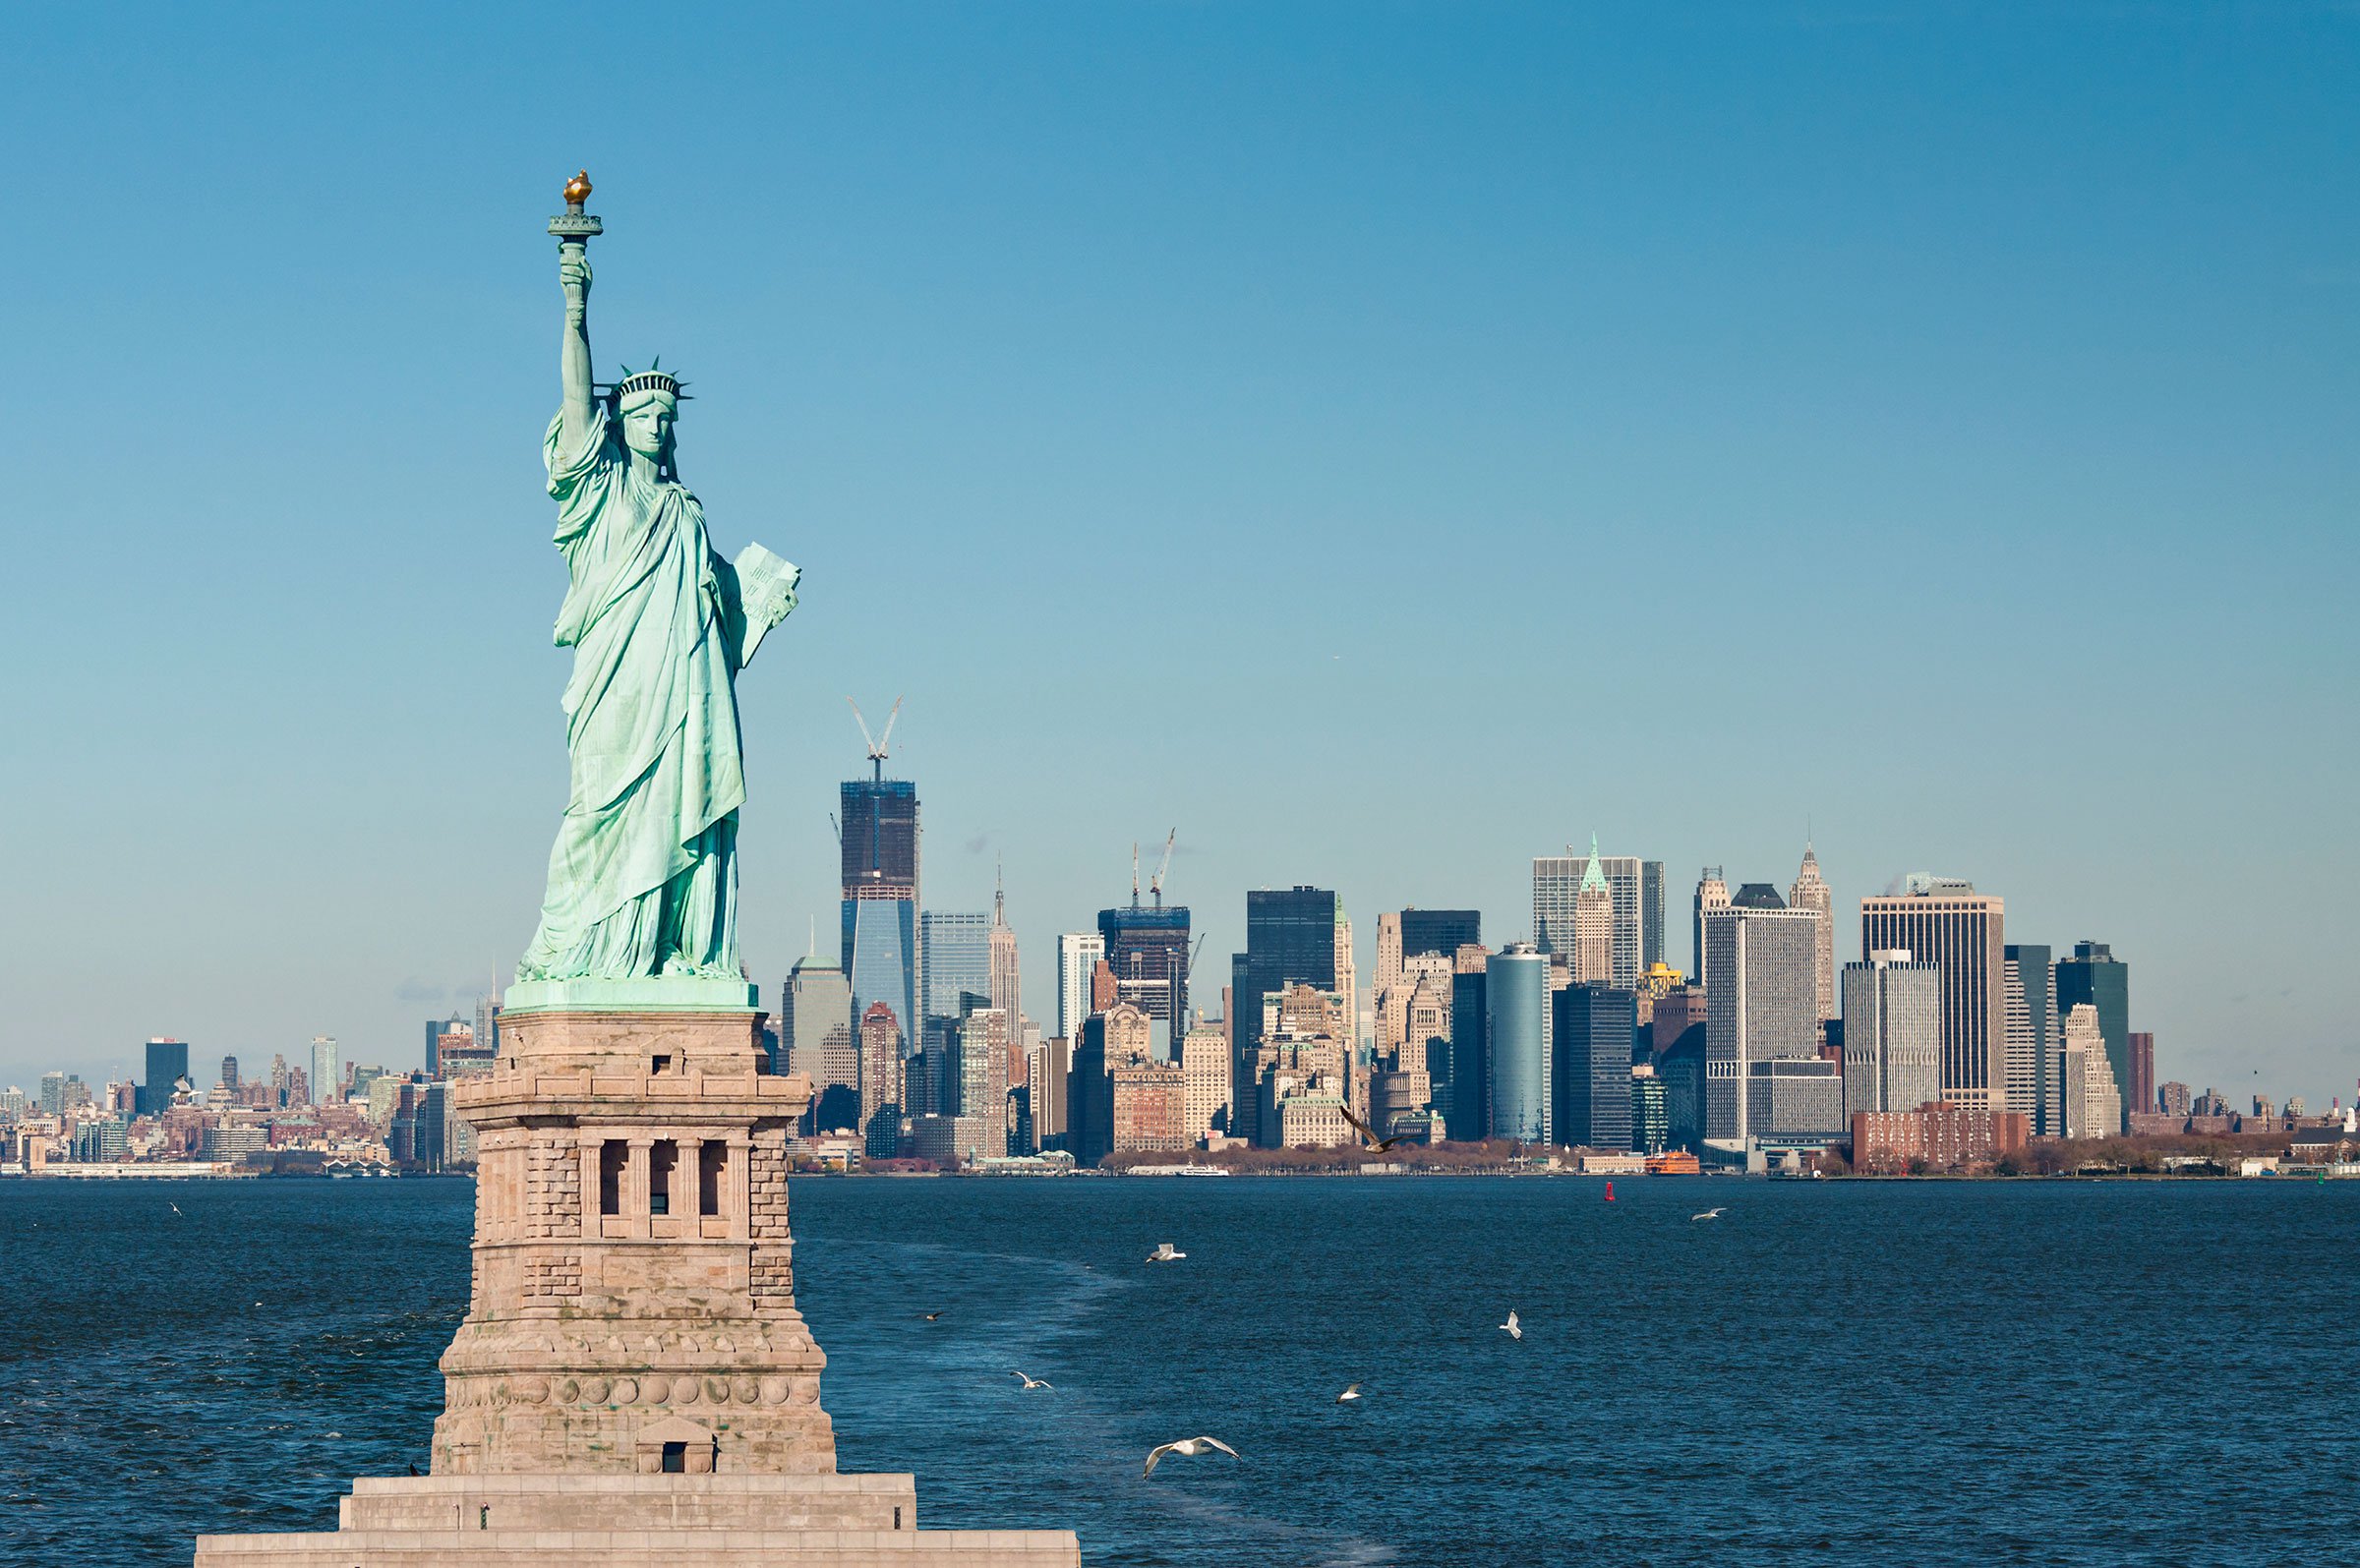 20 Facts About the Statue of Liberty | Reader's Digest